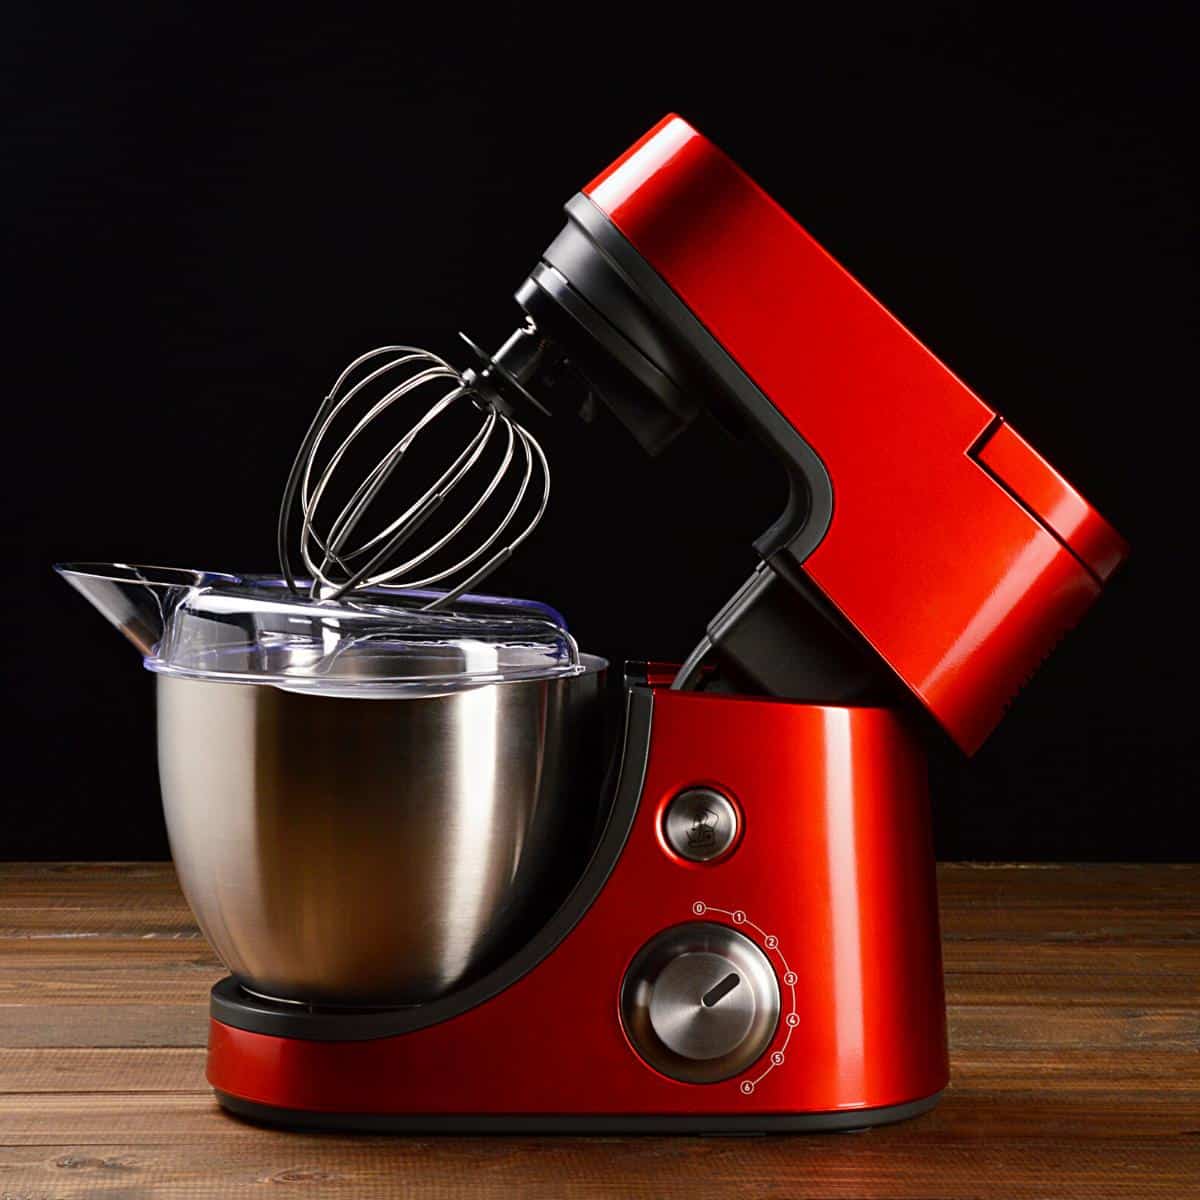 Best Stand Mixer for cooking and baking. 